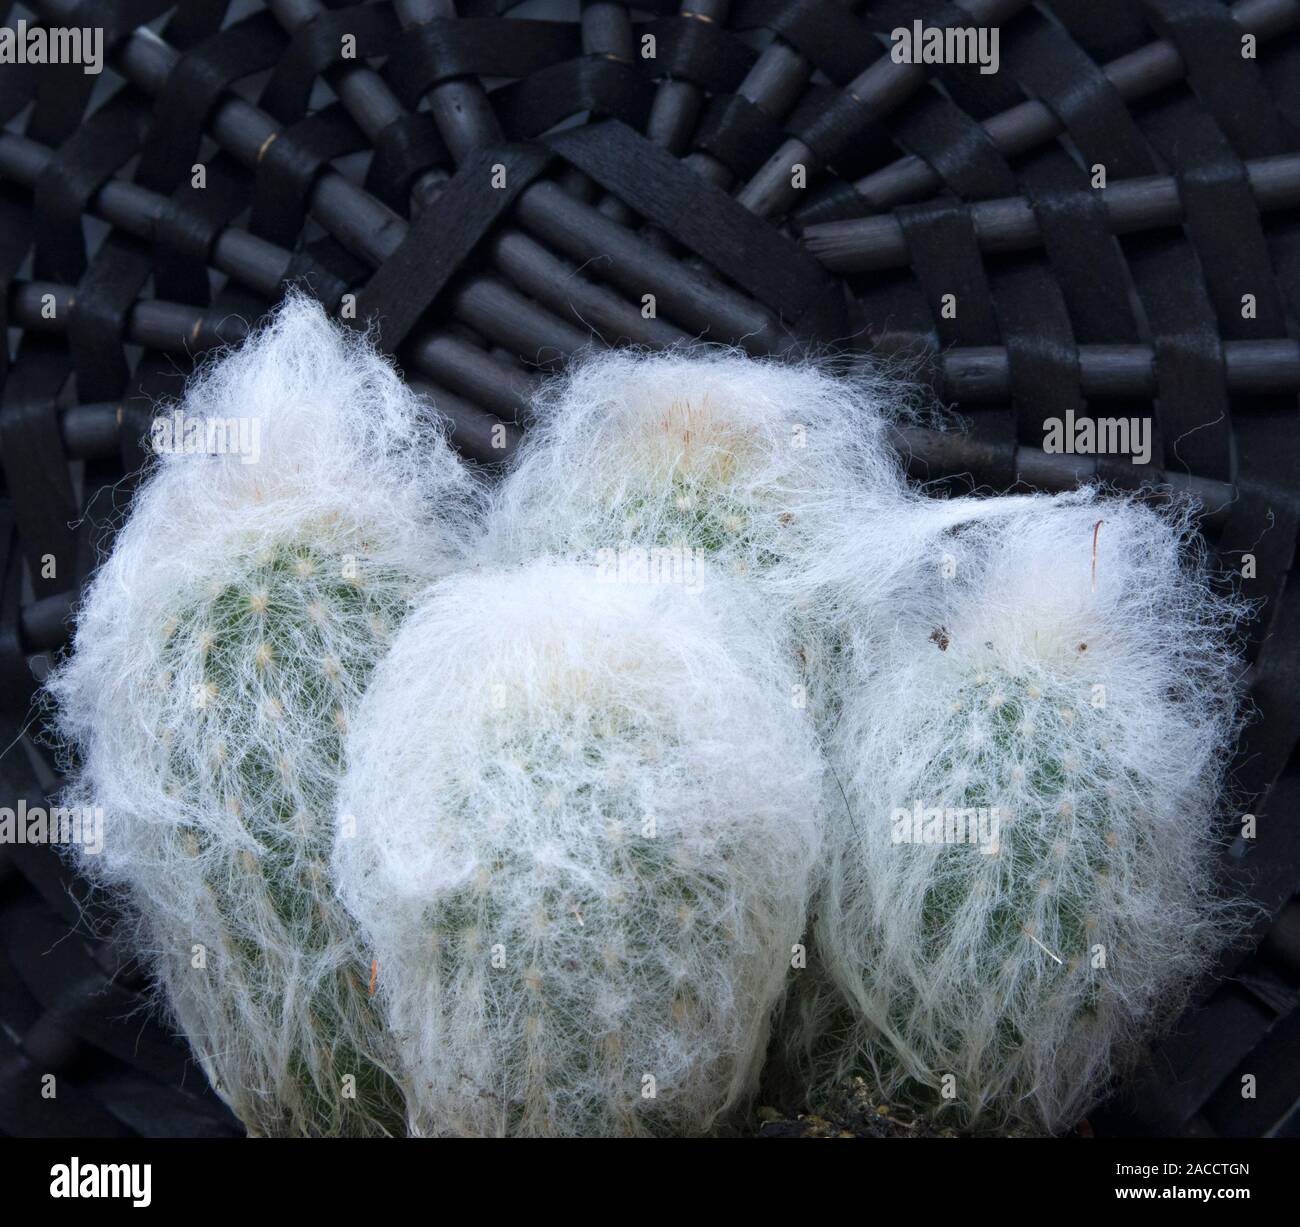 Four young snow cacti growing in a pot against wicker cover Stock Photo